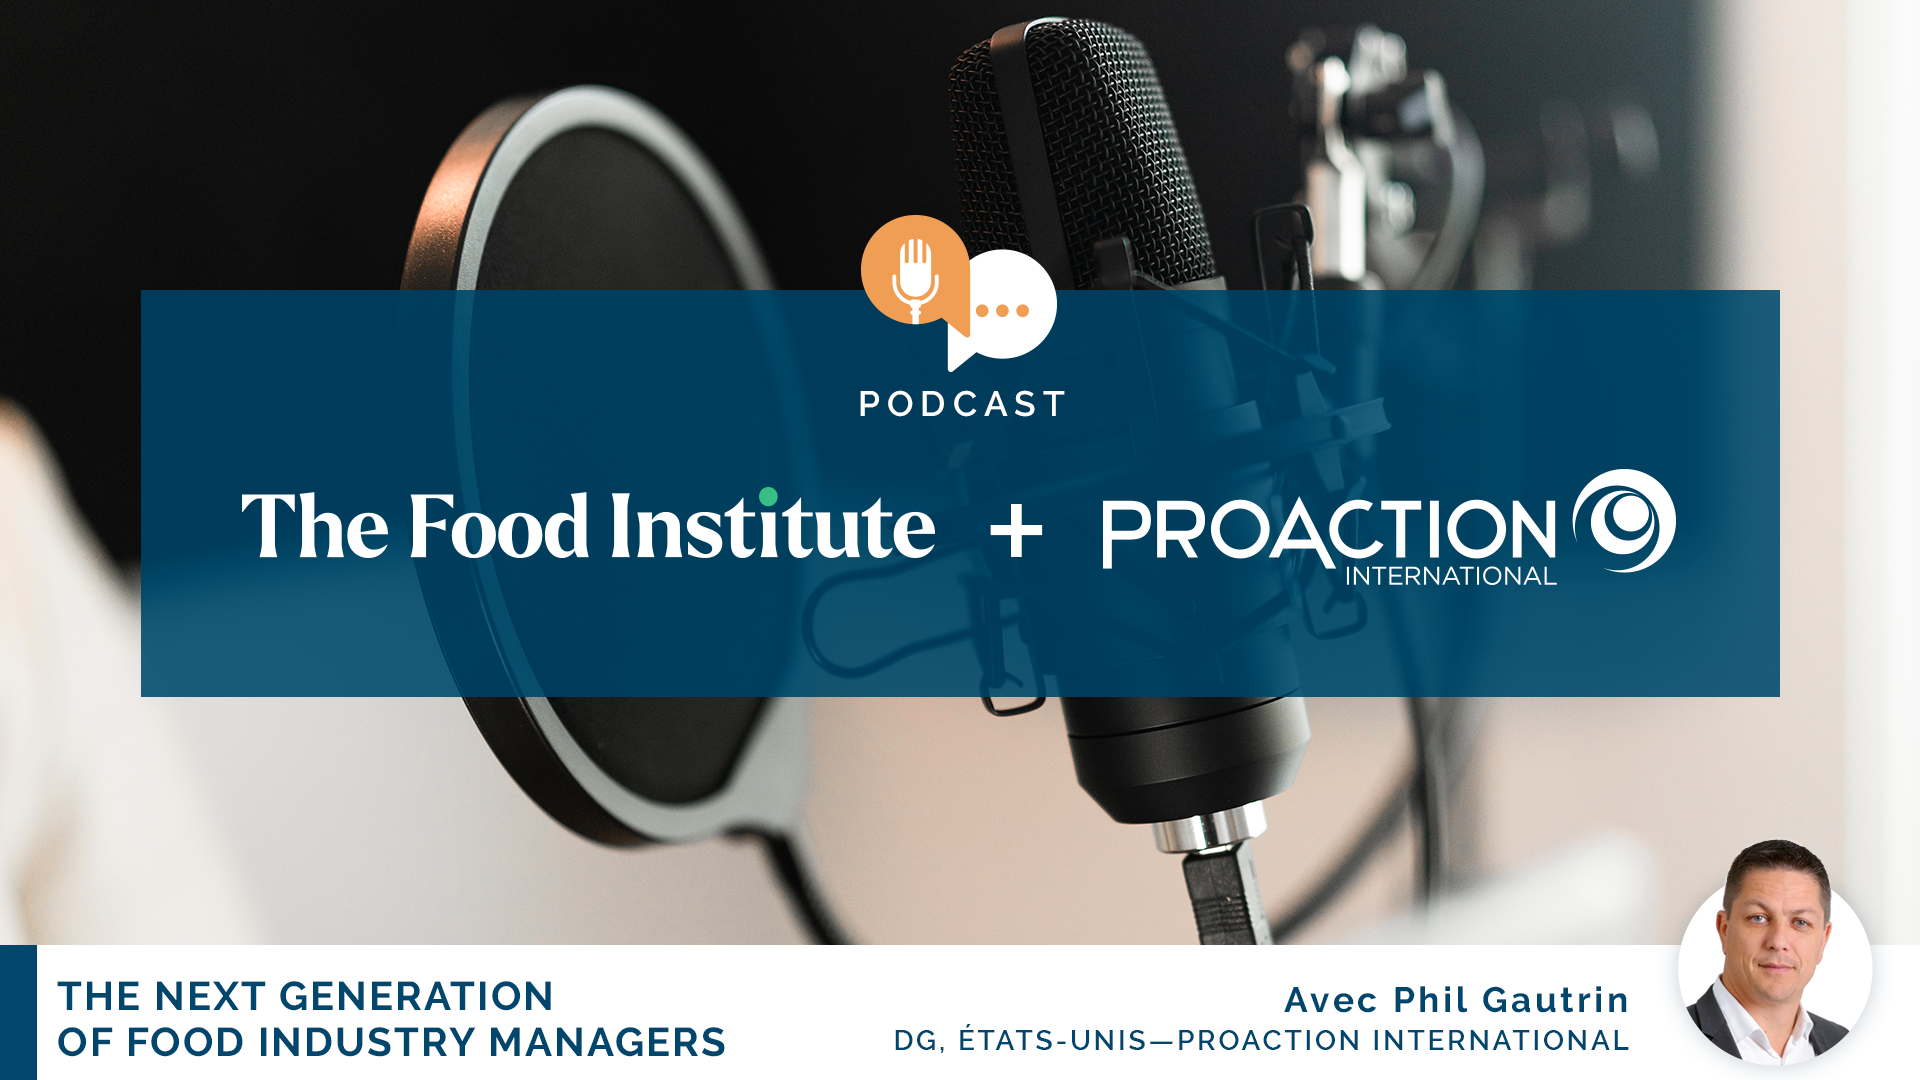 The Food Intitute Podcast + Proaction International